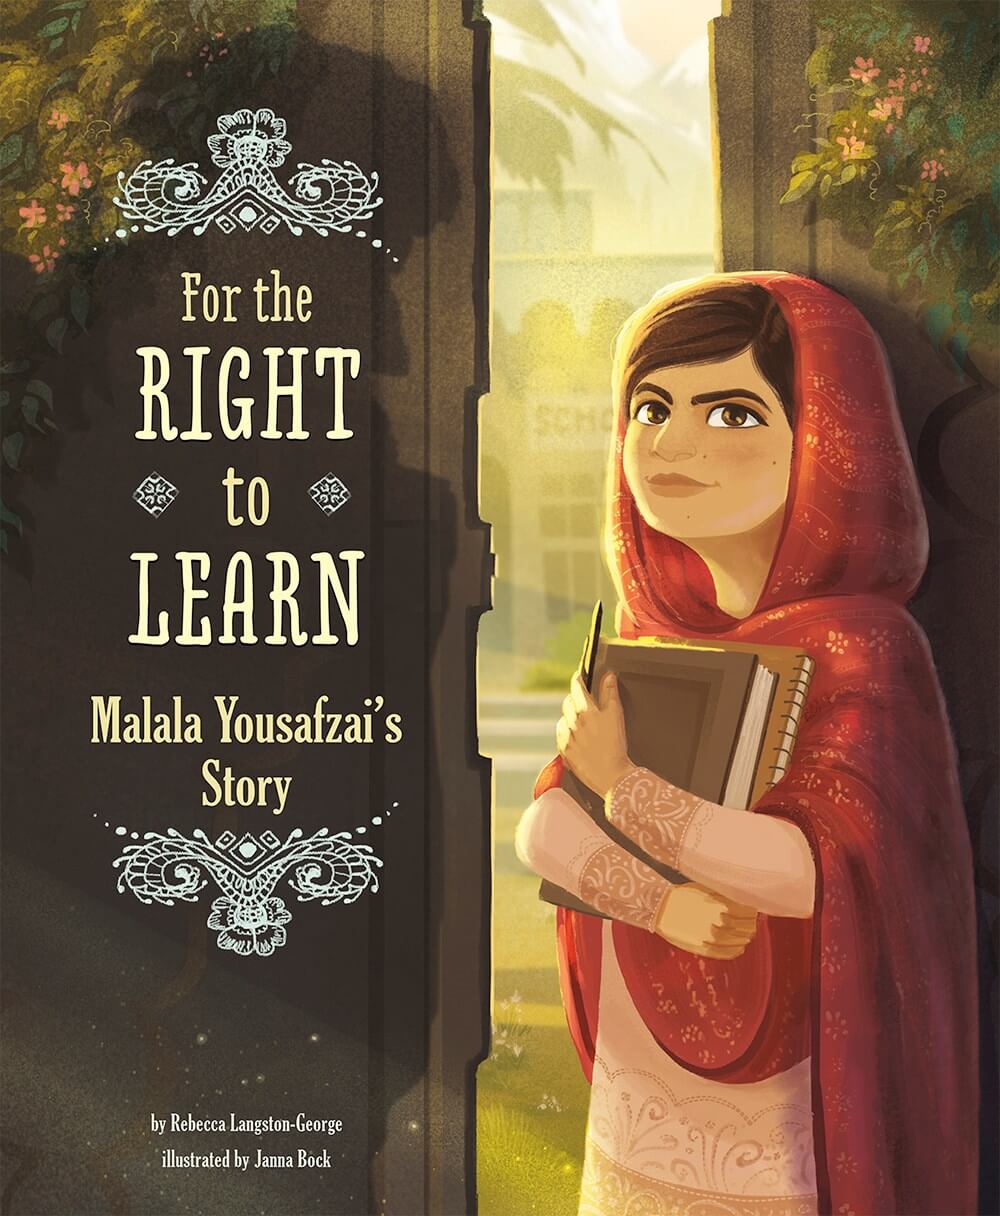 celebrate-picture-books-picture-book-review-for-the-right-to-learn-malala-yousafzai's-story-cover